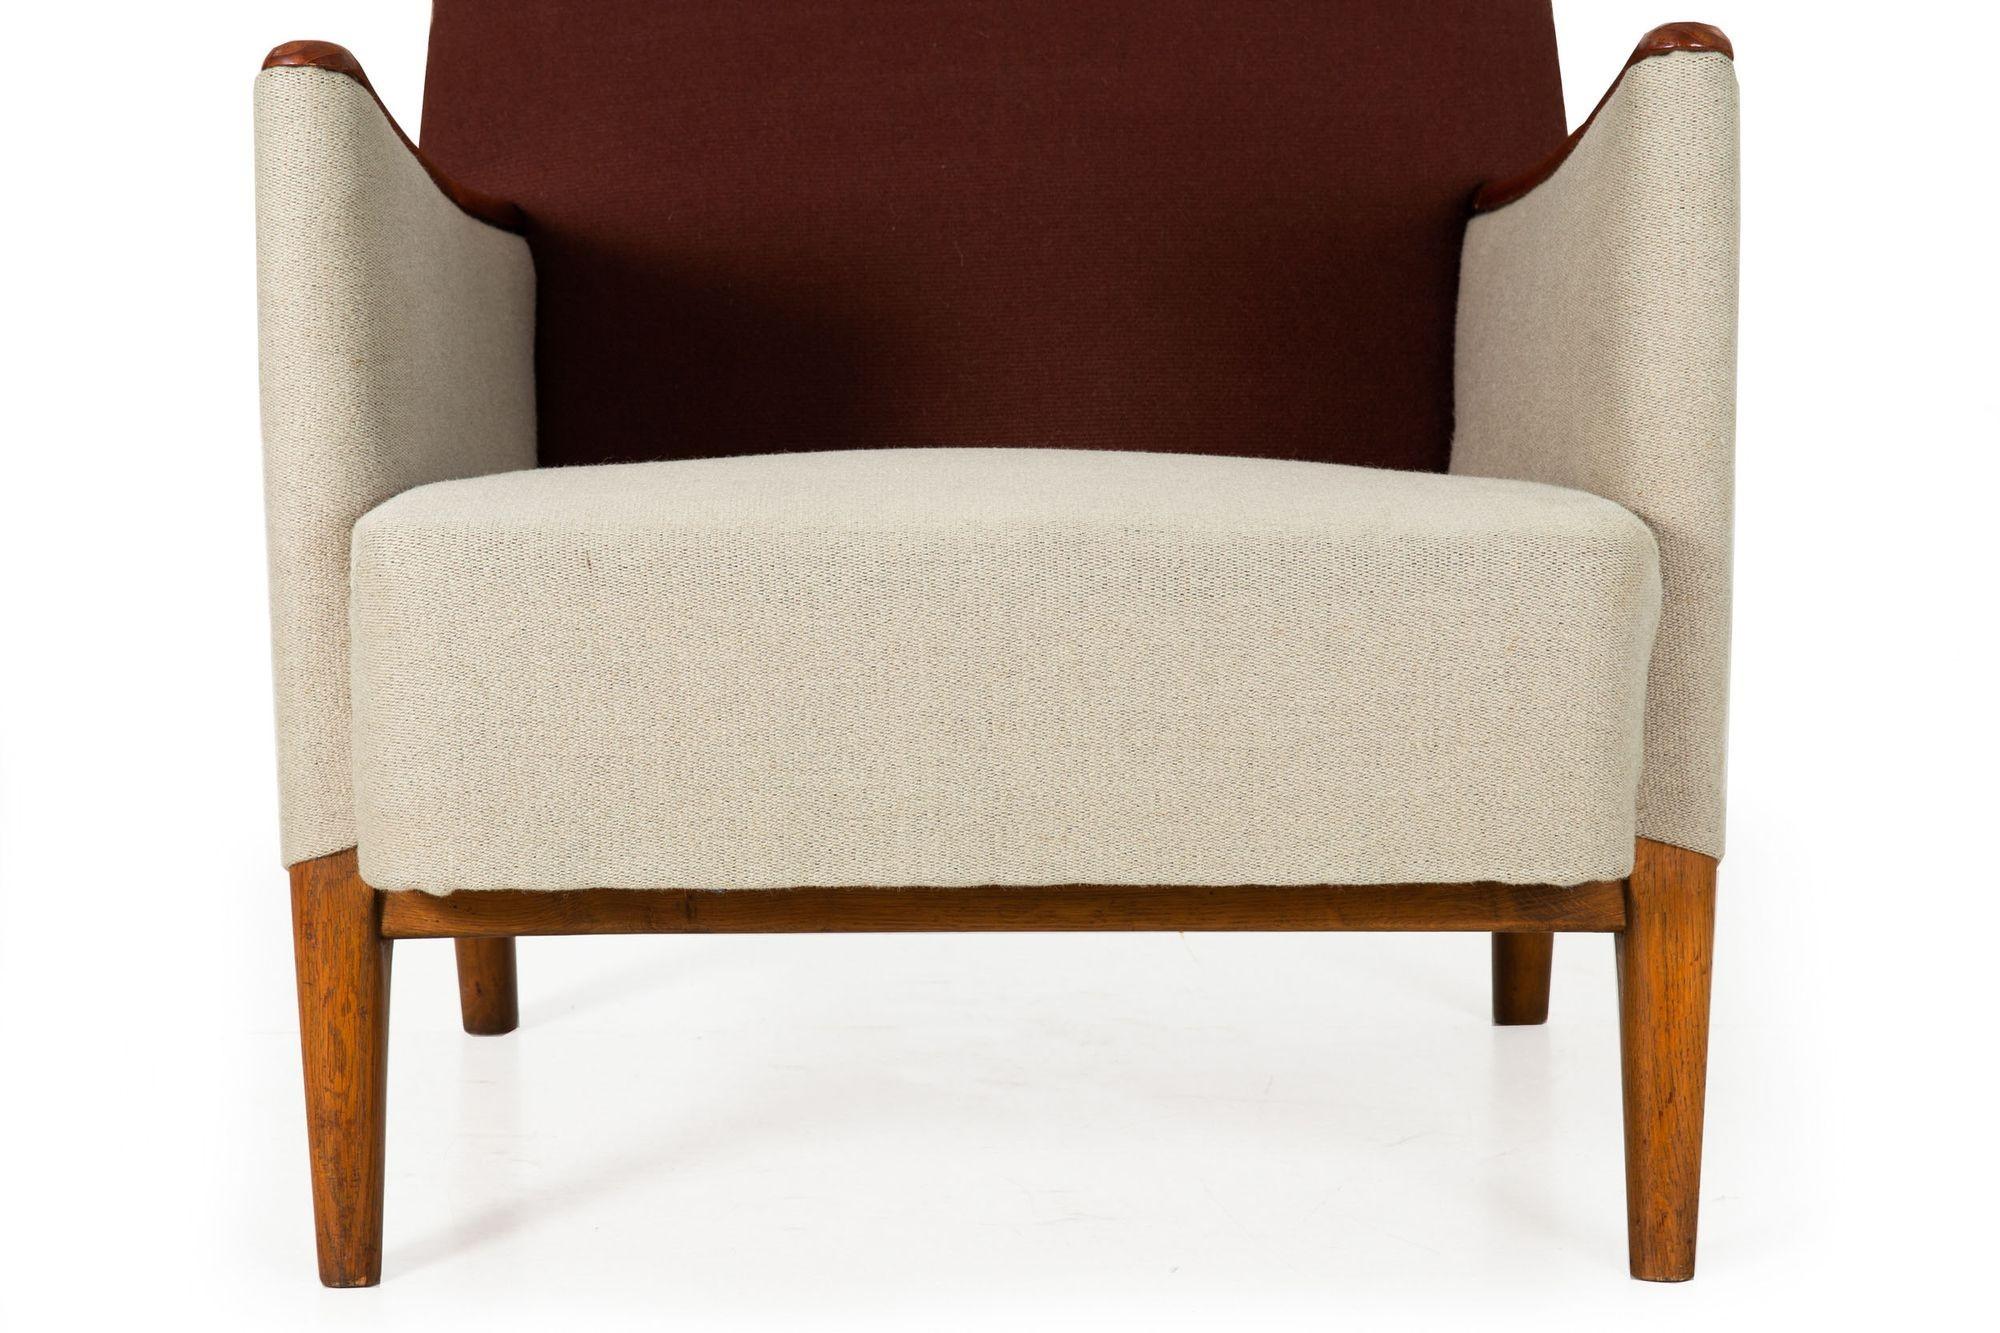 Danish Mid-Century Modern Sofa and Chair Set in Sculpted Teak, circa 1960 For Sale 8